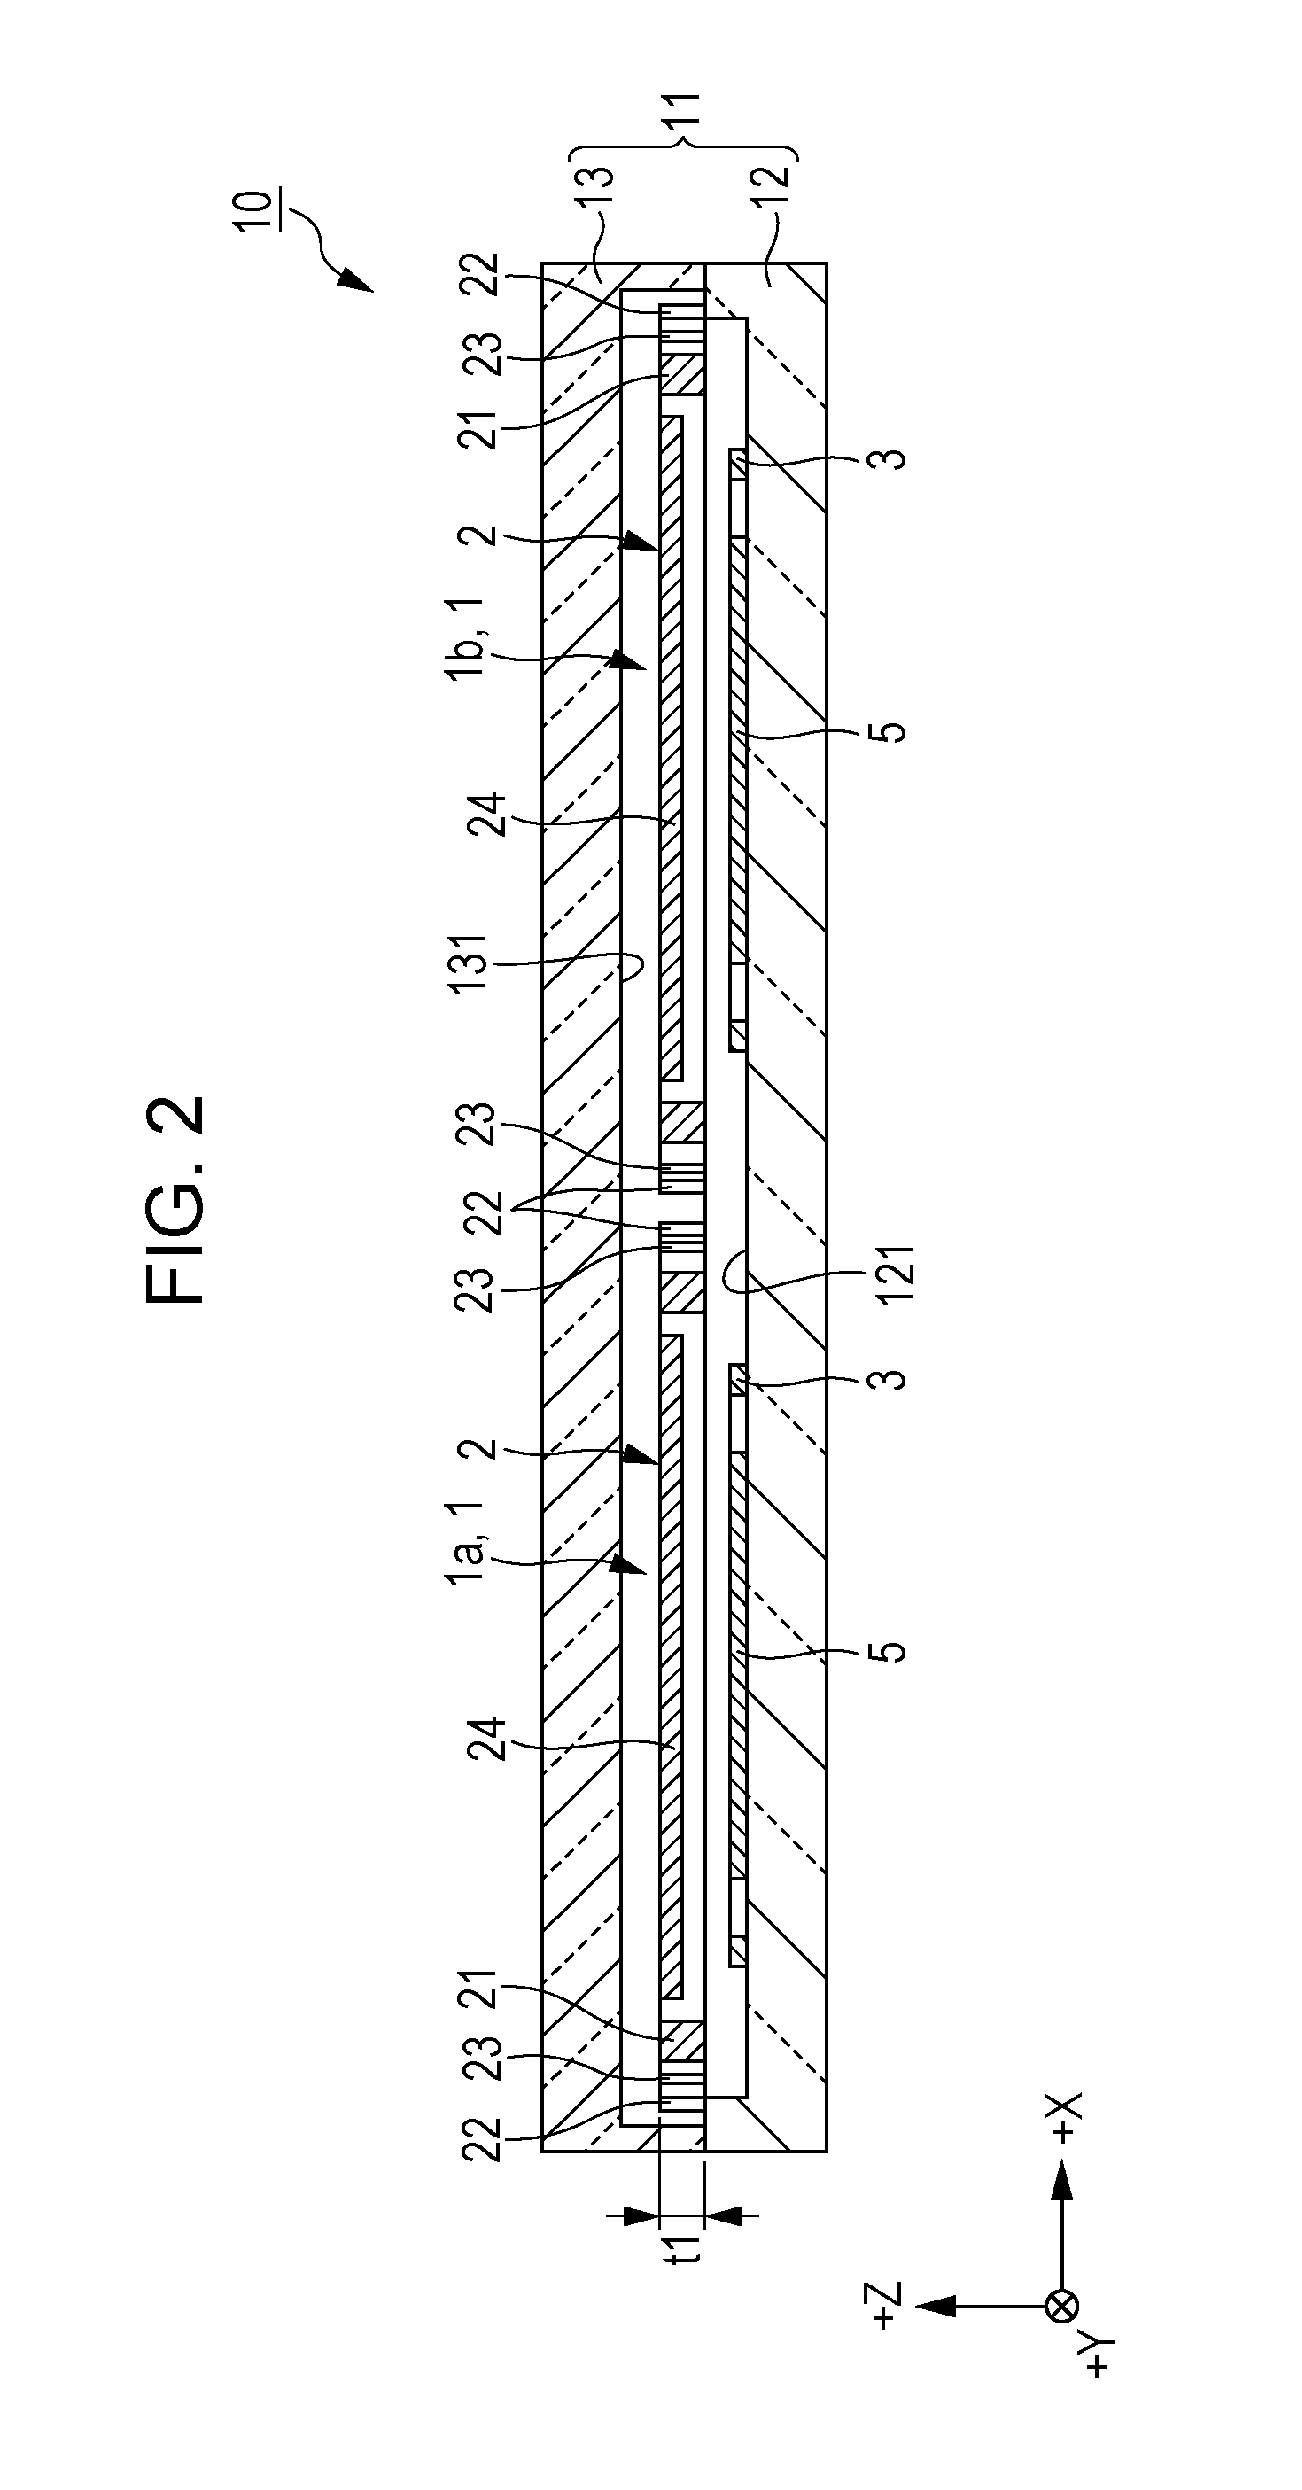 Physical quantity sensor element, physical quantity sensor, electronic equipment, and movable body